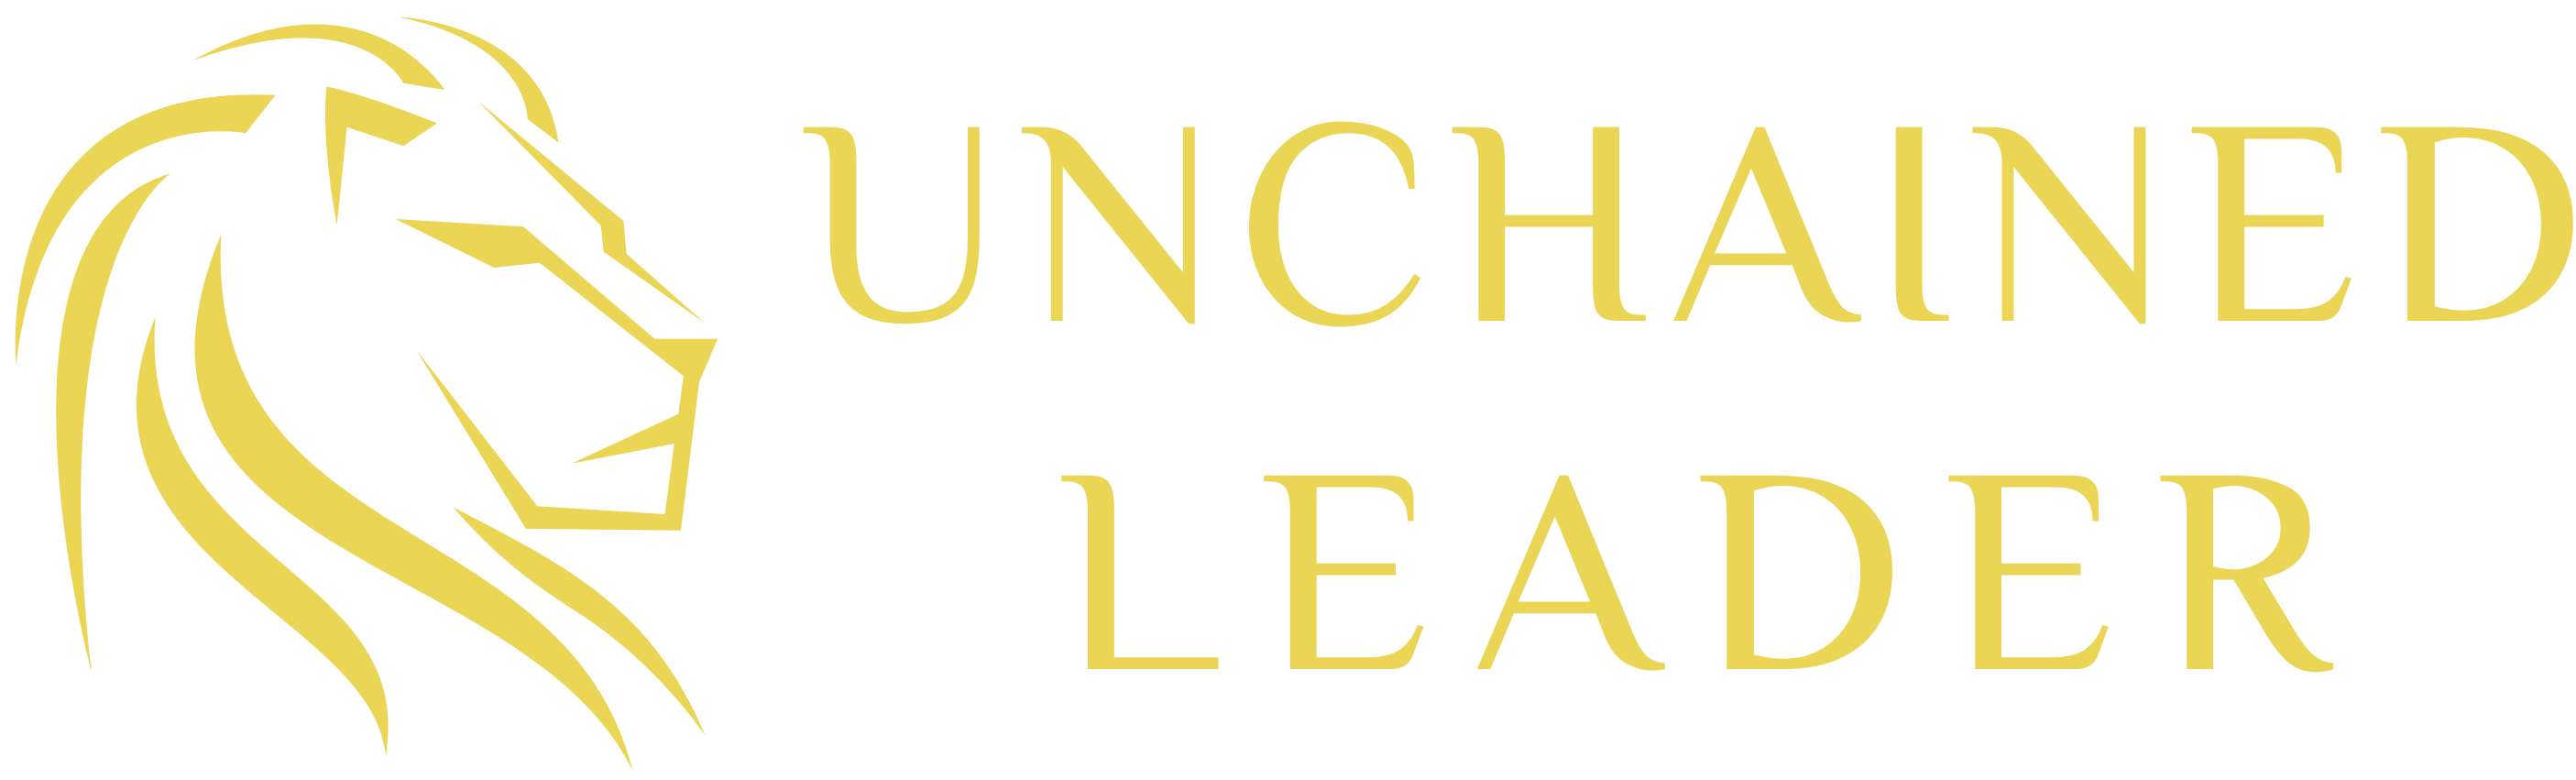 Unchained Leader Logo